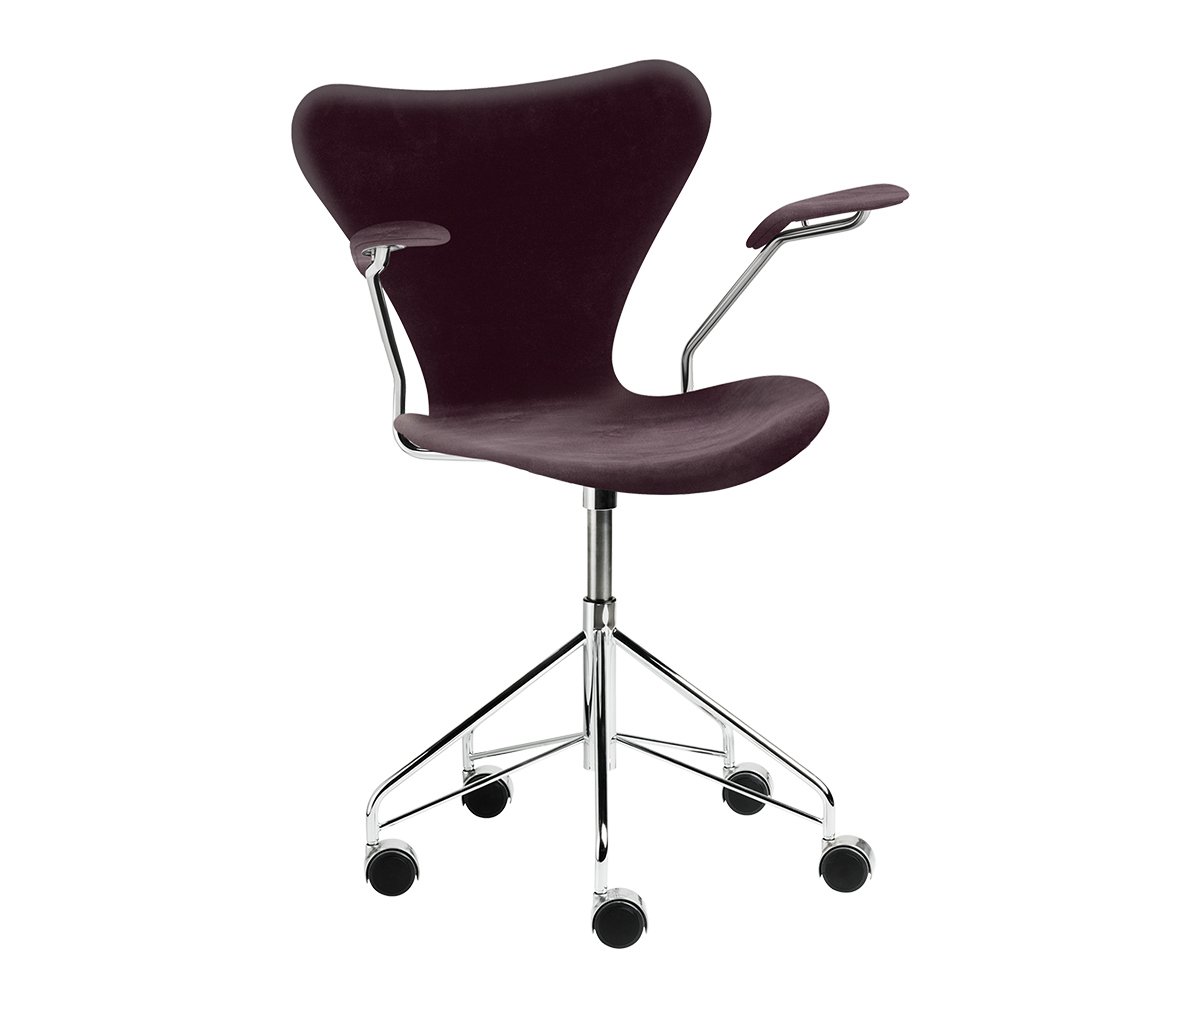 Office Chair 3217, “Series 7”